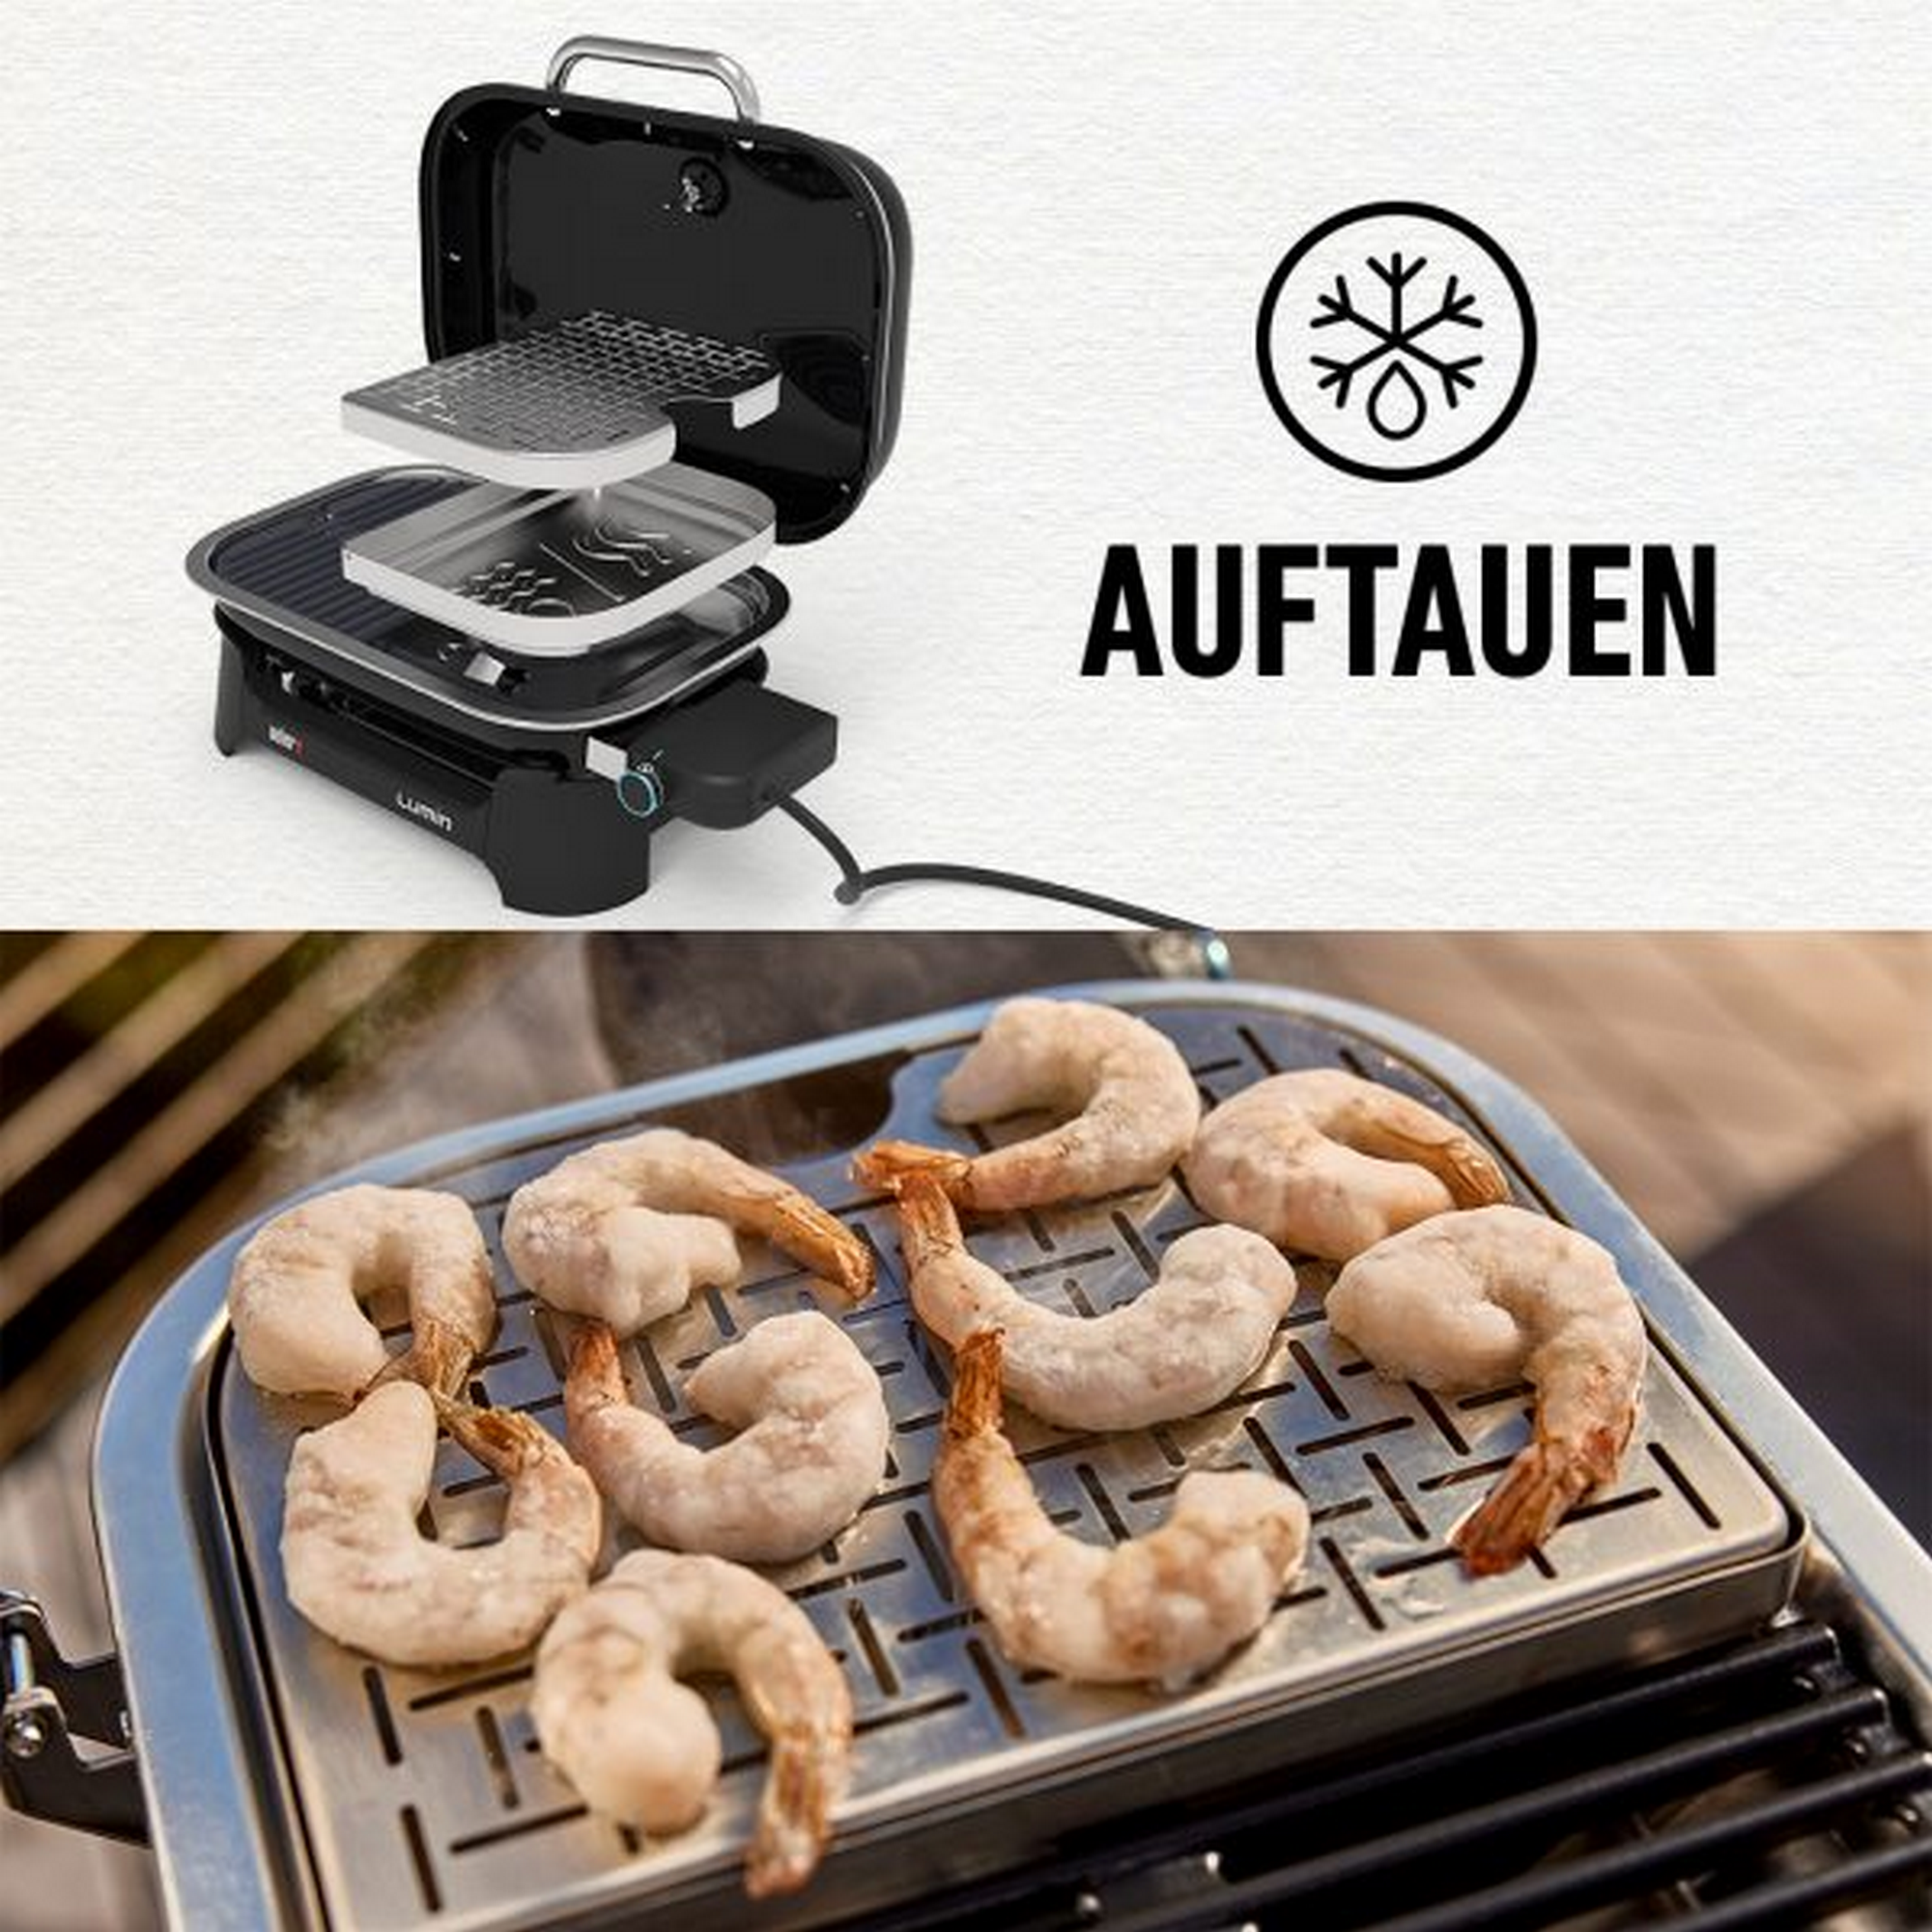 Elektrogrill 'Lumin Compact' mit Stand schwarz 2200 W + product picture